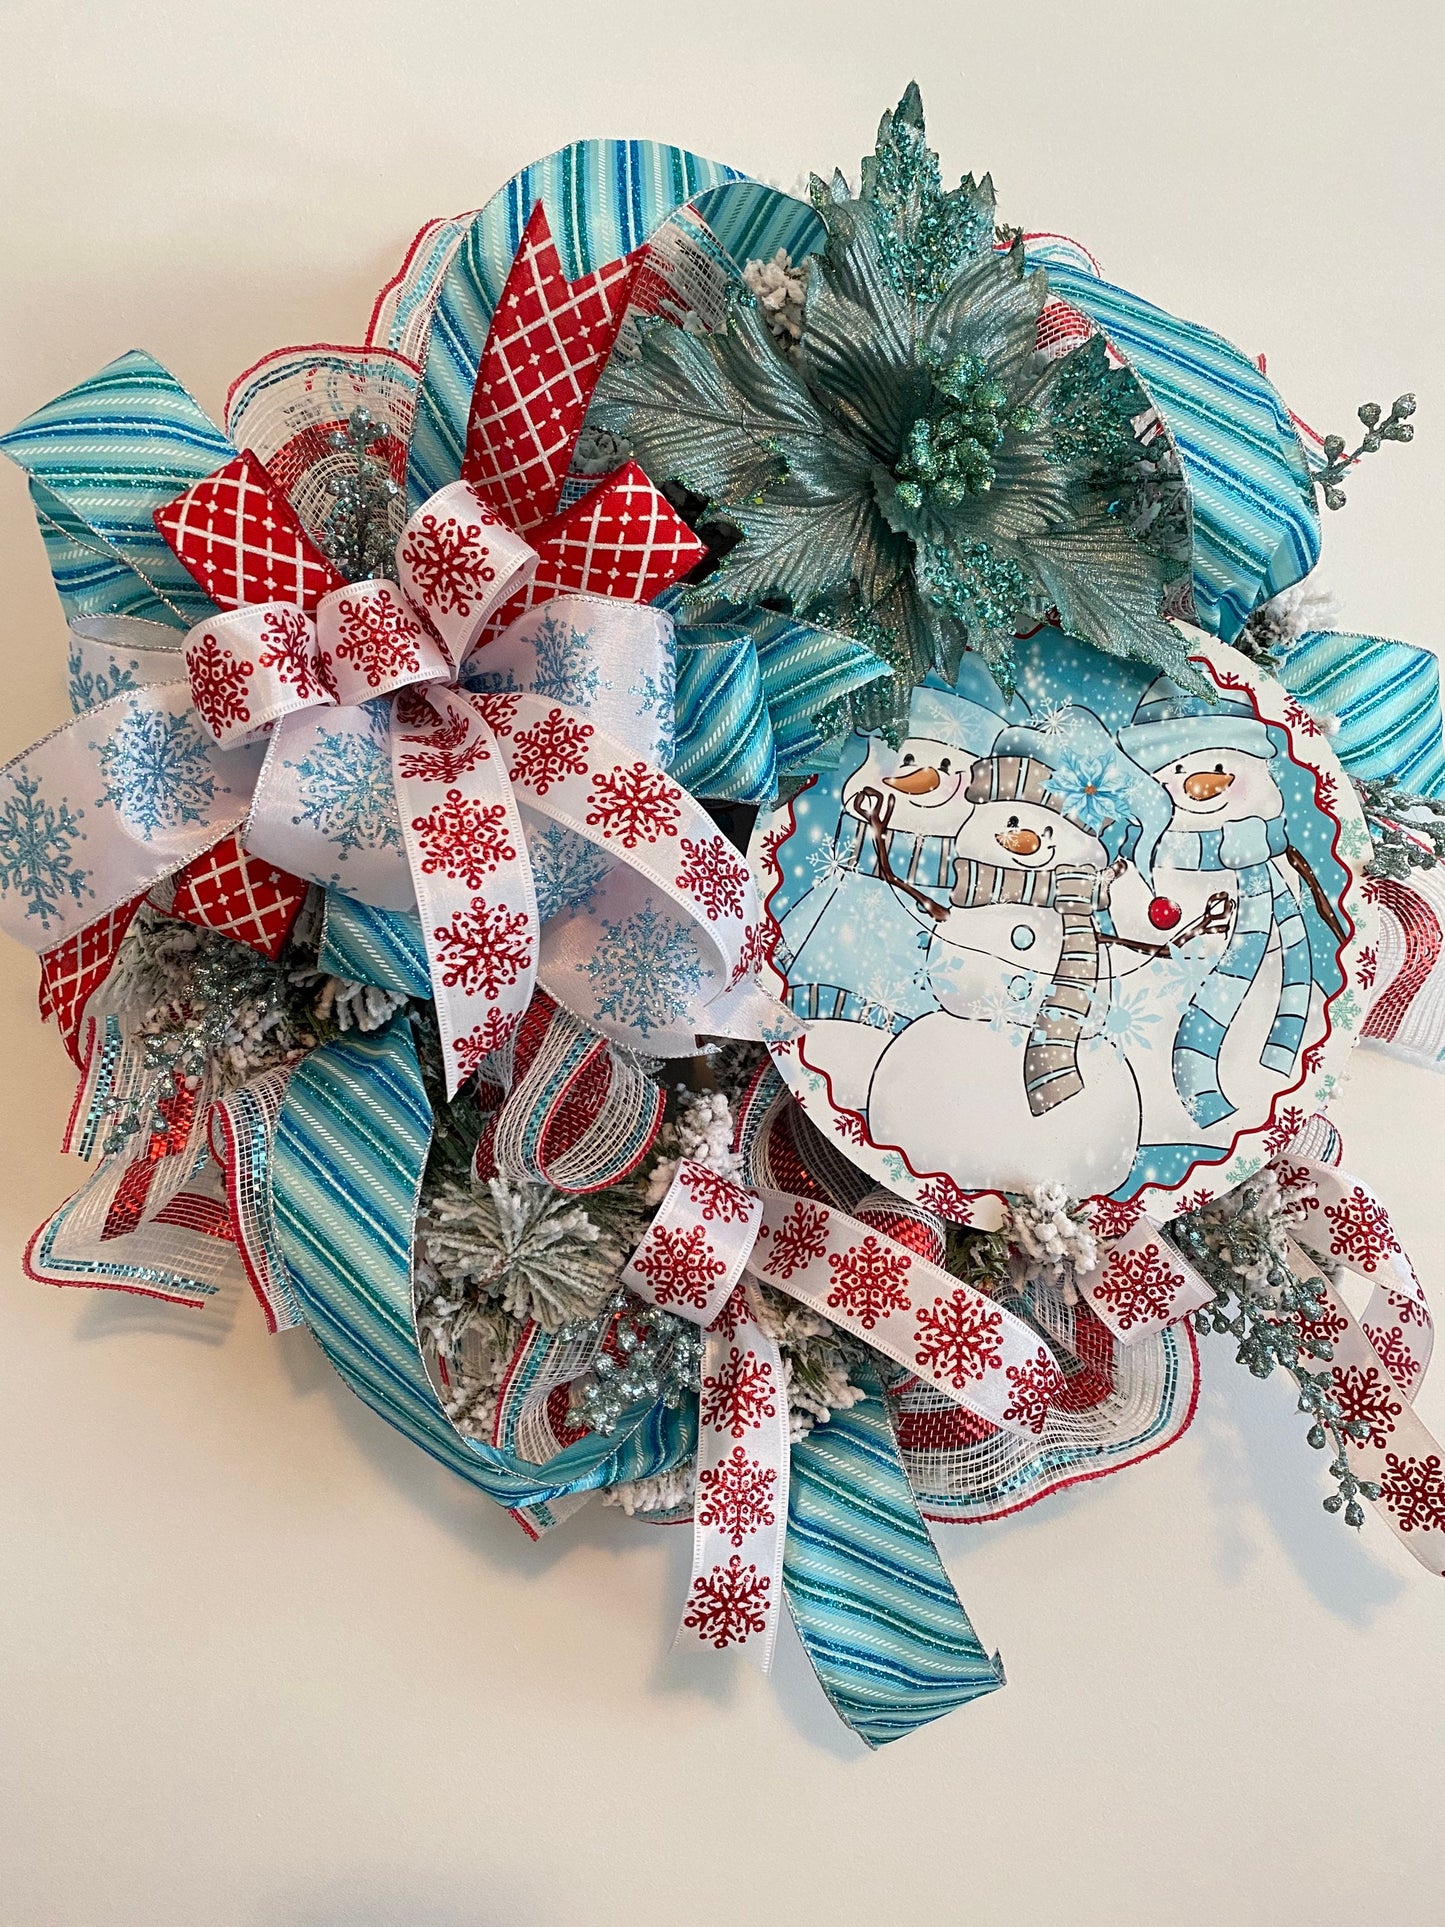 Snowman Winter Wreath for Front Door, Ice Blue and Red Whimsical Christmas Wreath, Winter Wonderland Decorations